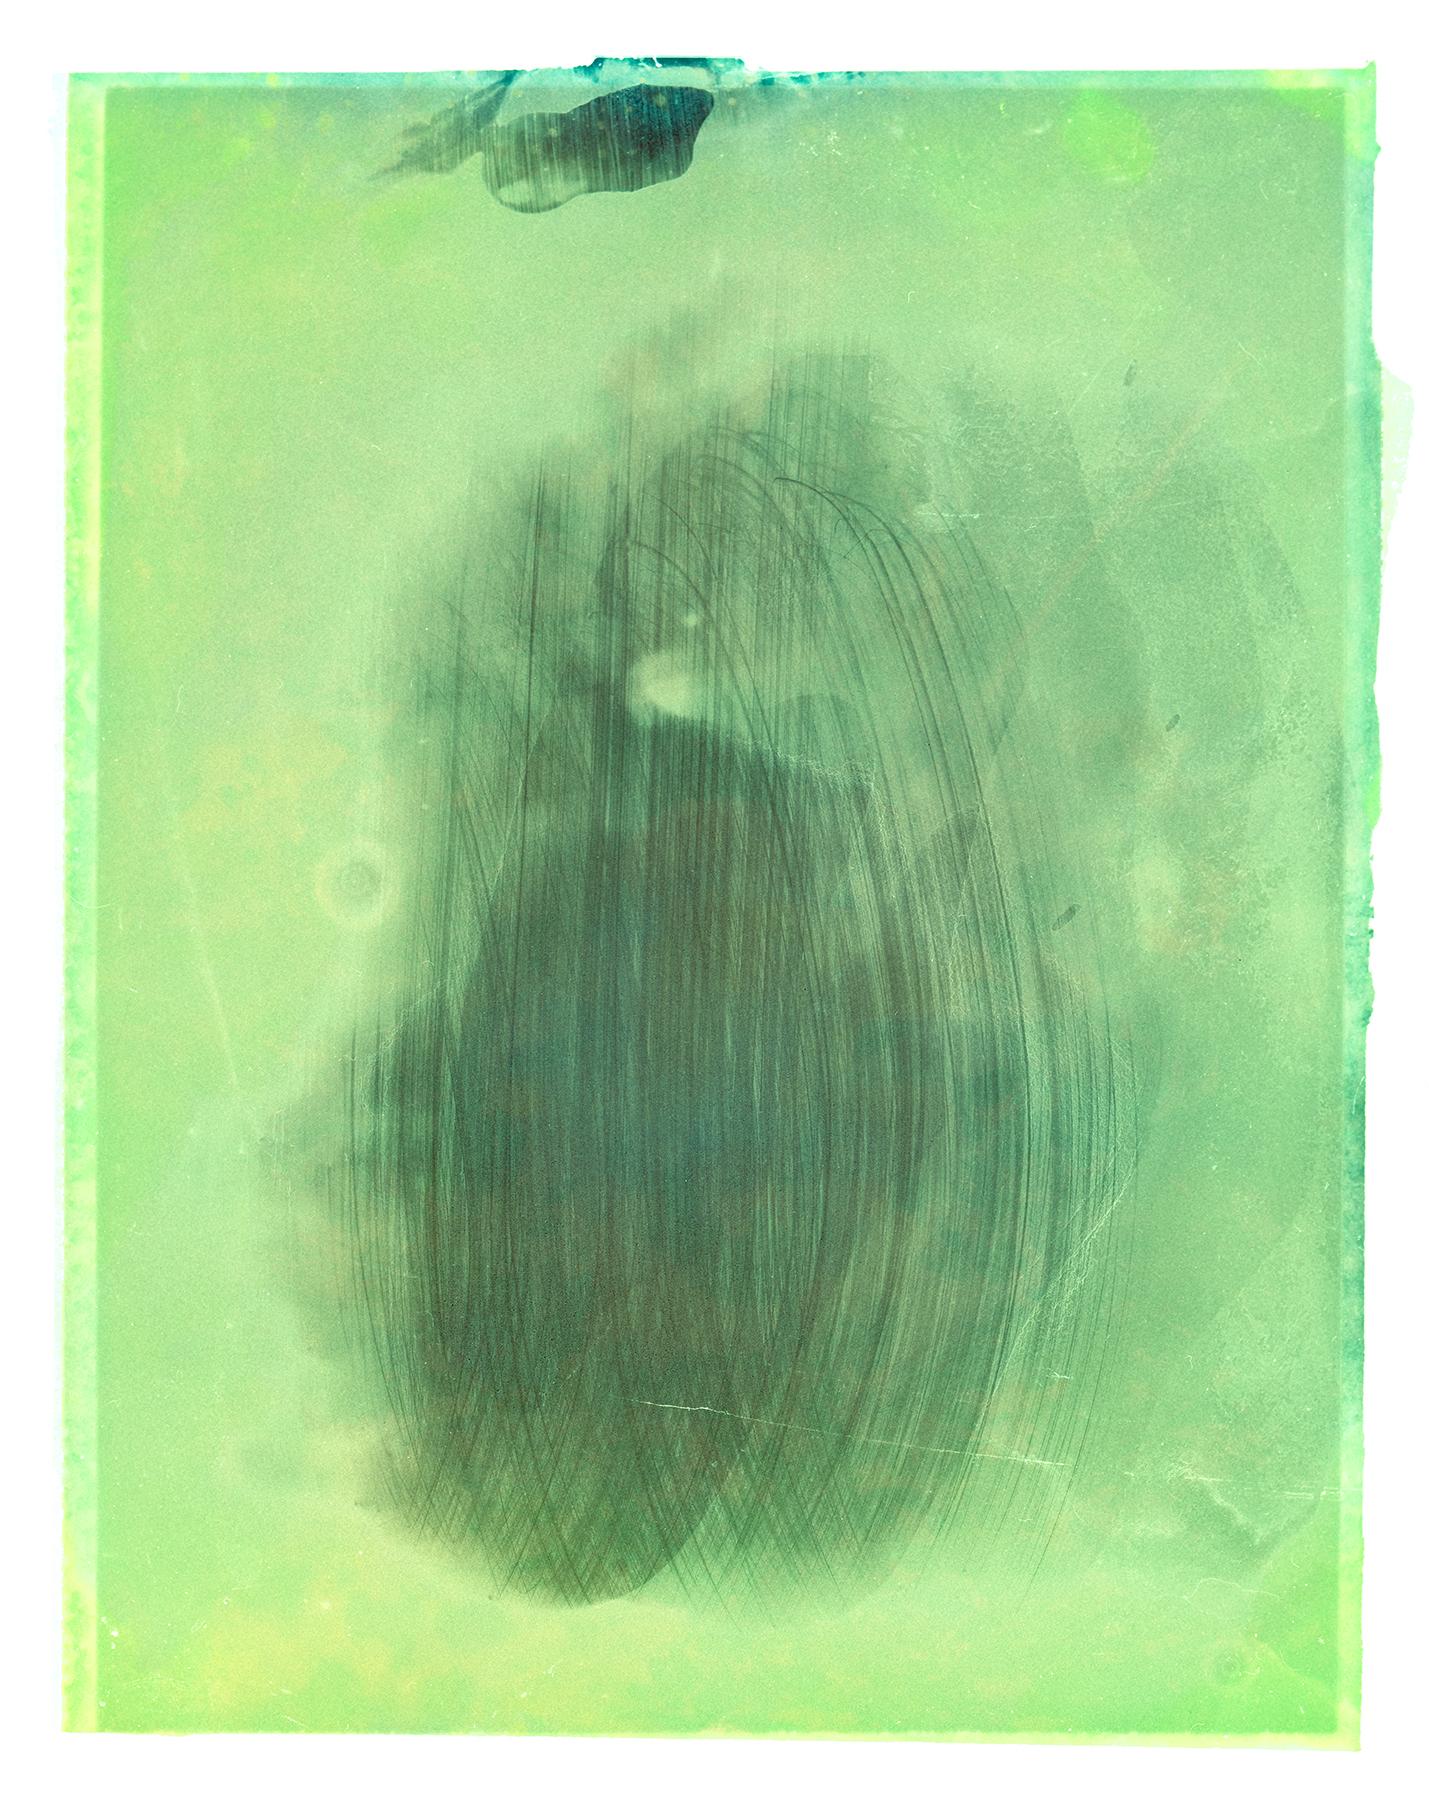 Cristina Fontsare Figurative Photograph - Some kind of green Air - Contemporary, Polaroid, Photograph, Childhood, abstract